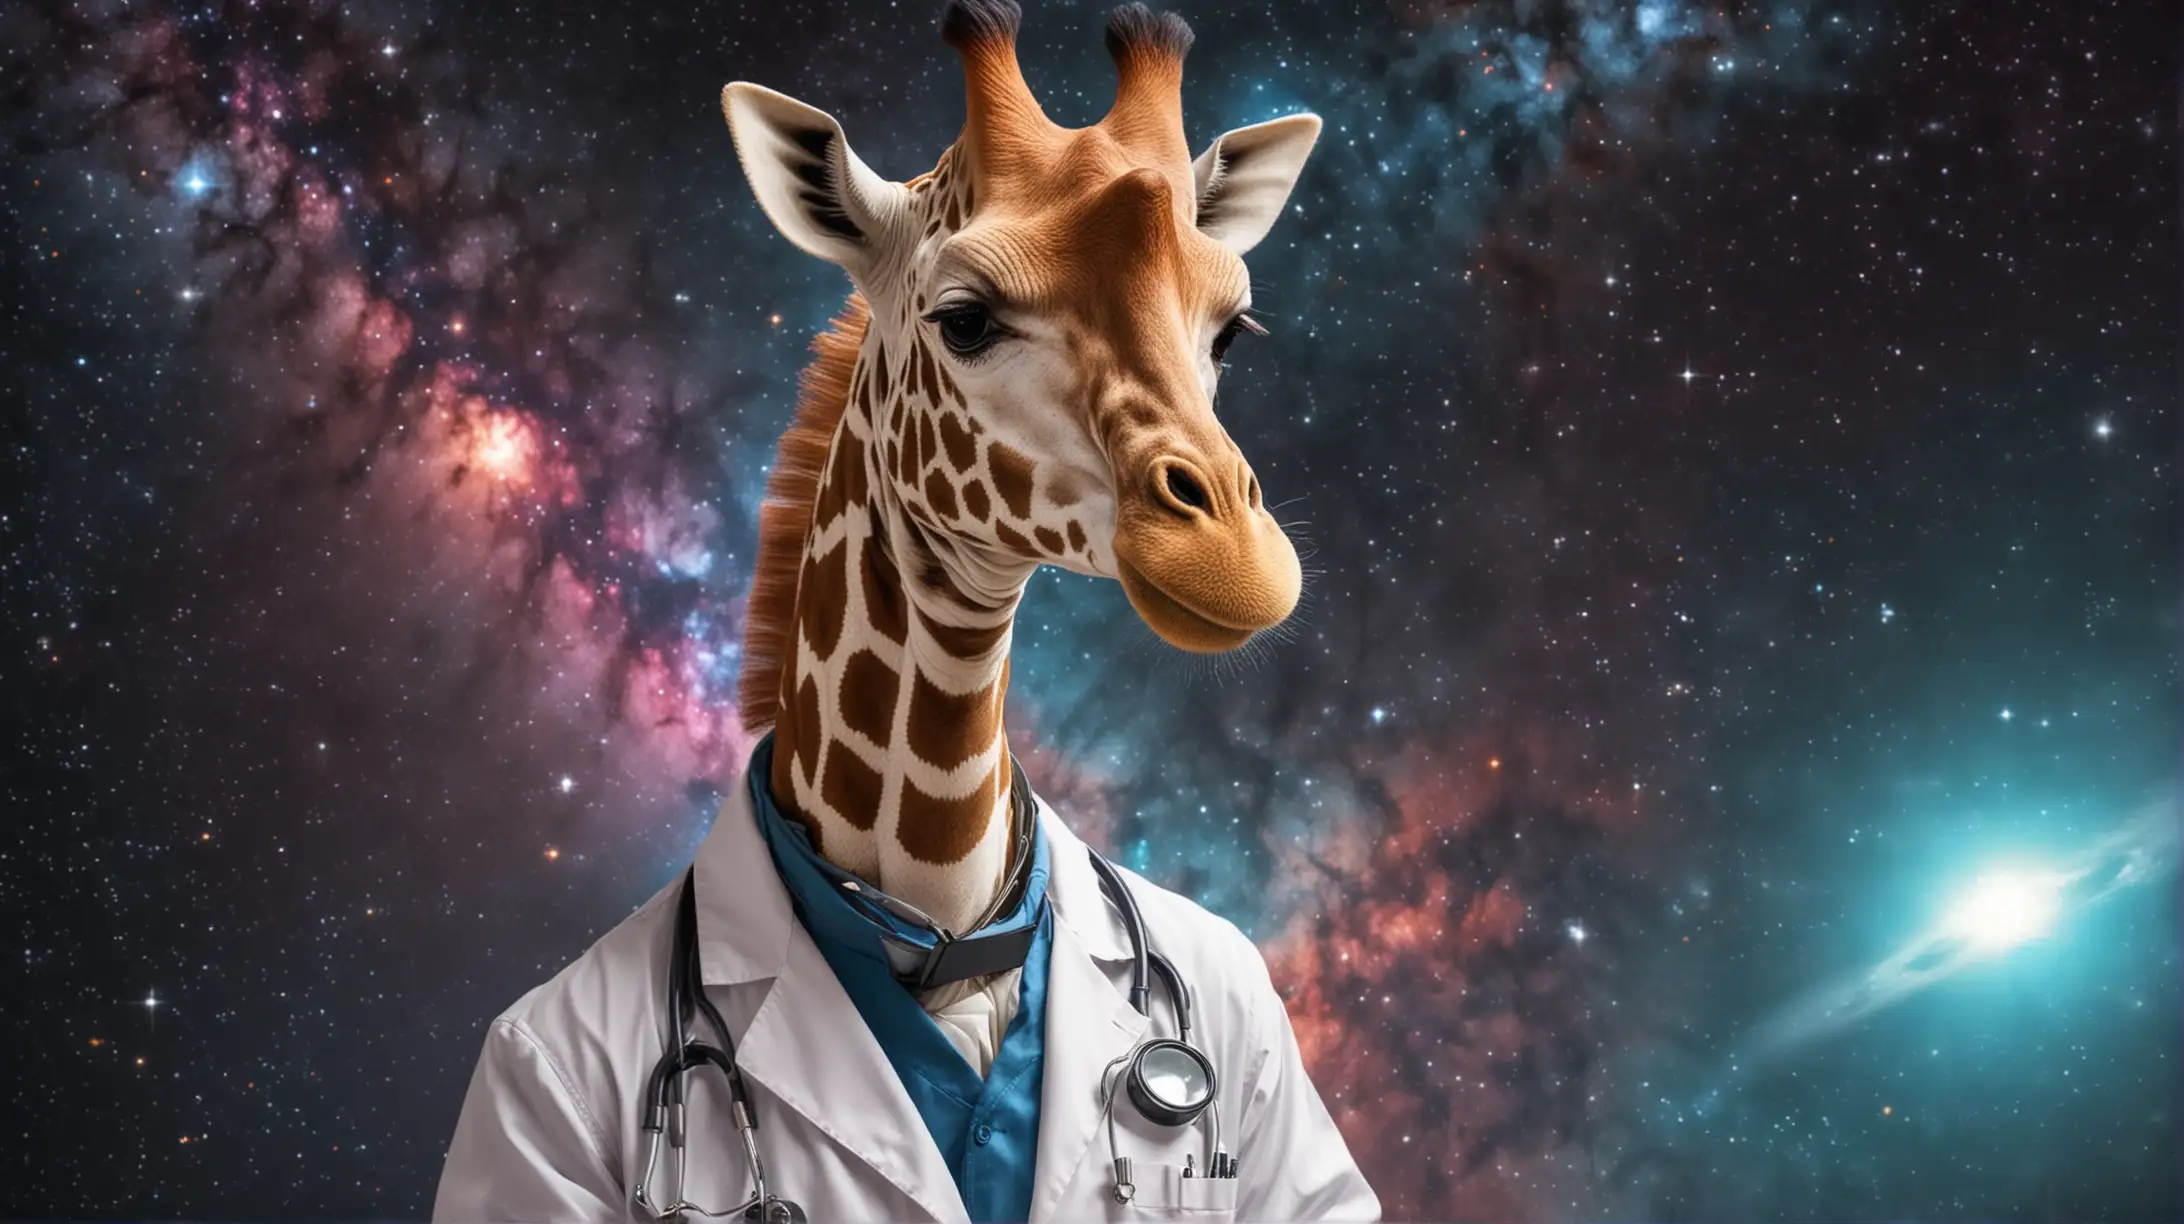 Giraffe dressed as a doctor in the space